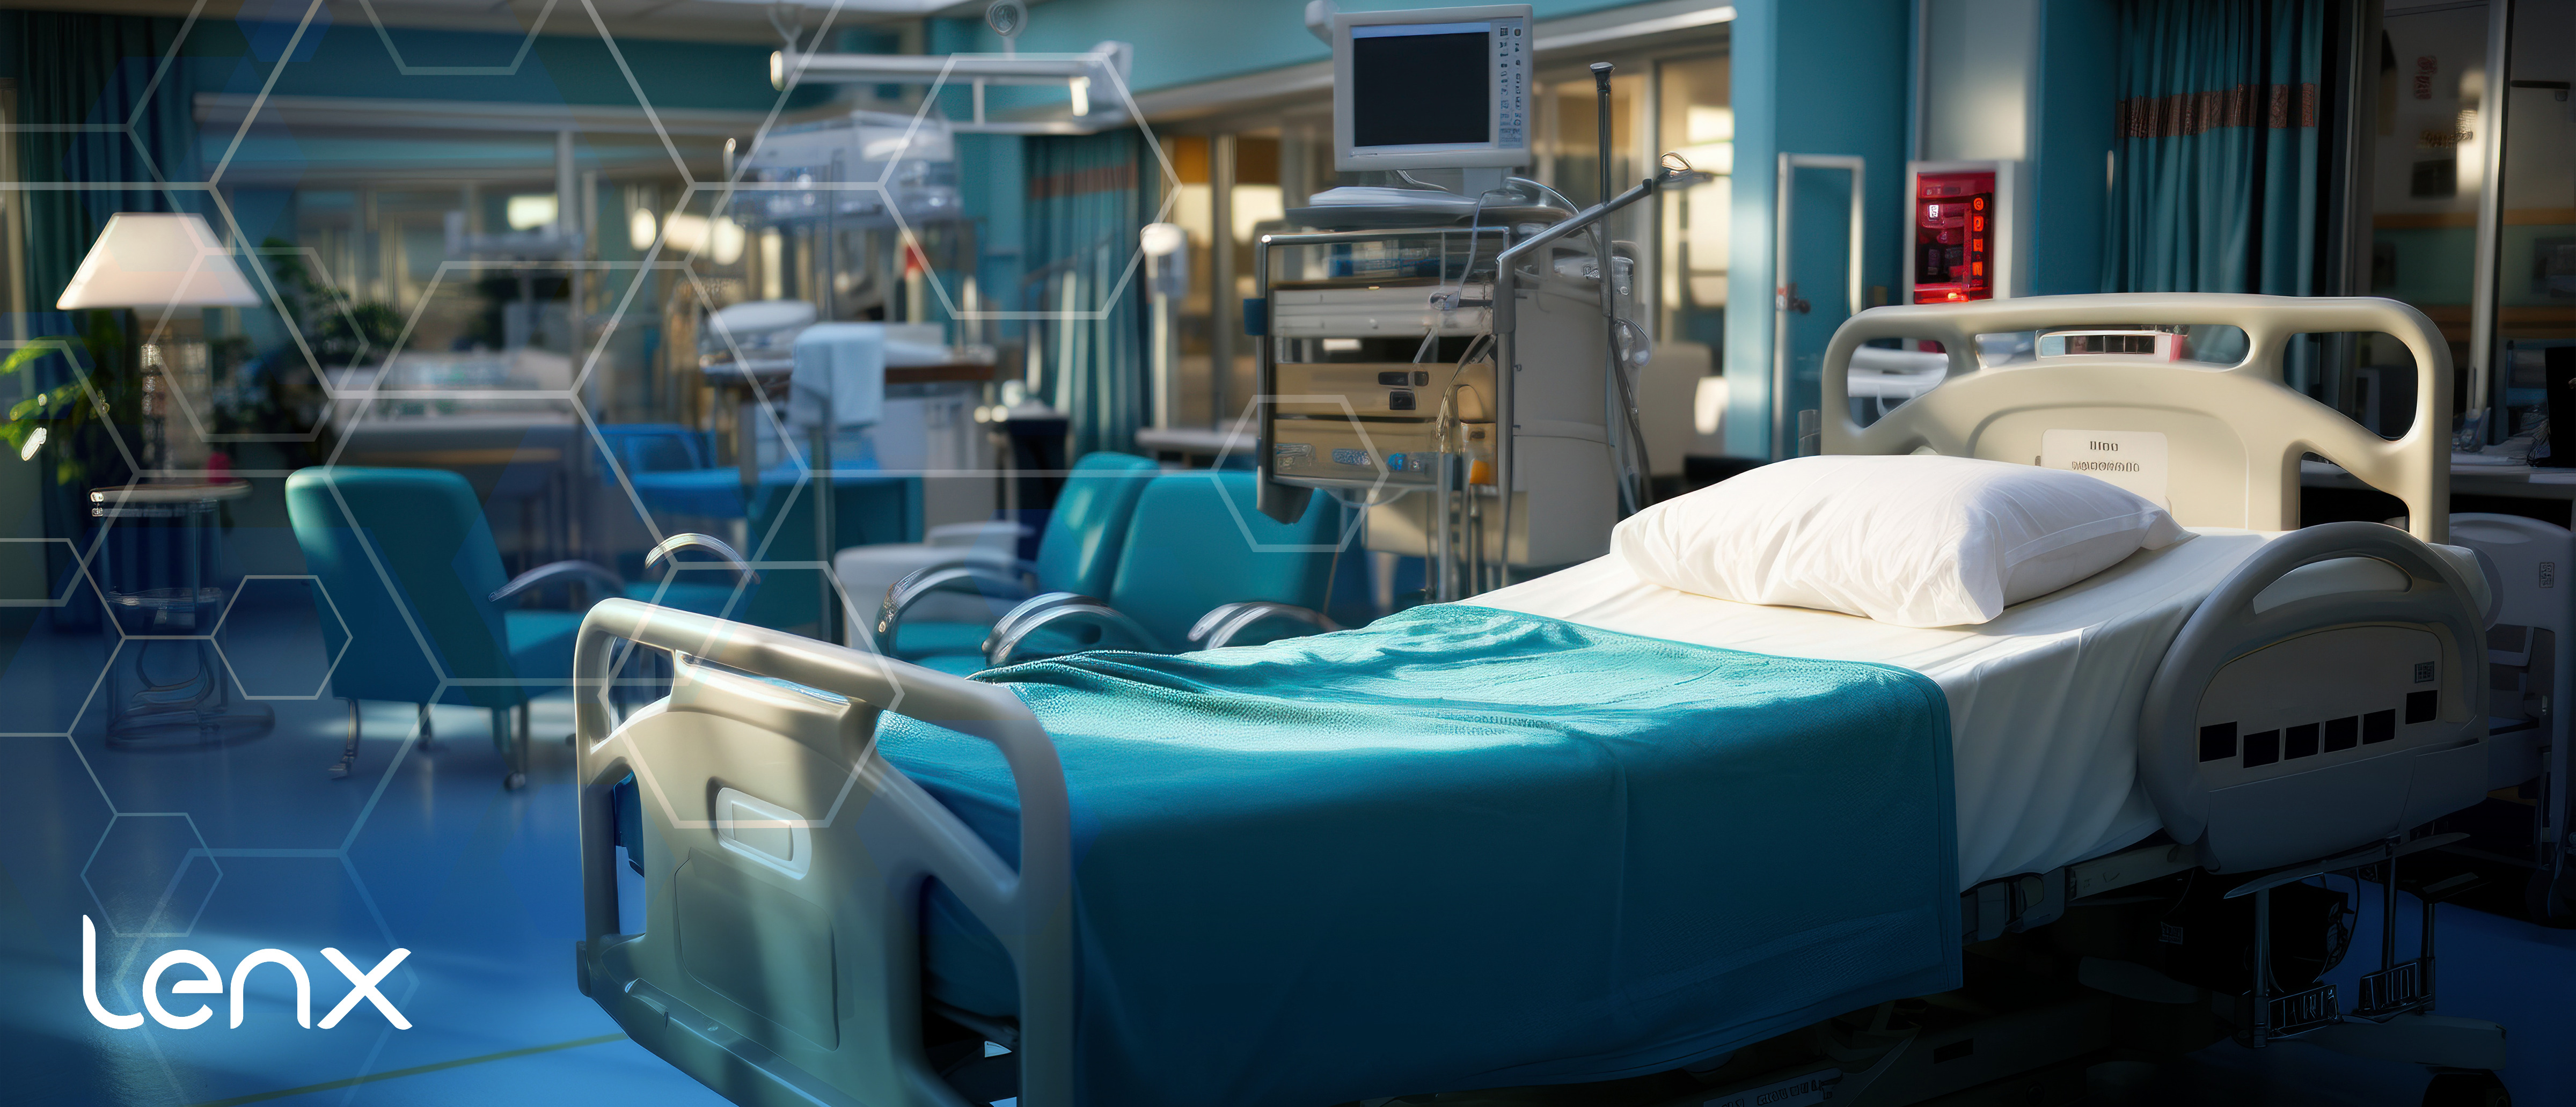 Protecting Hospitals with AI Security and Active Shooter Detection Systems